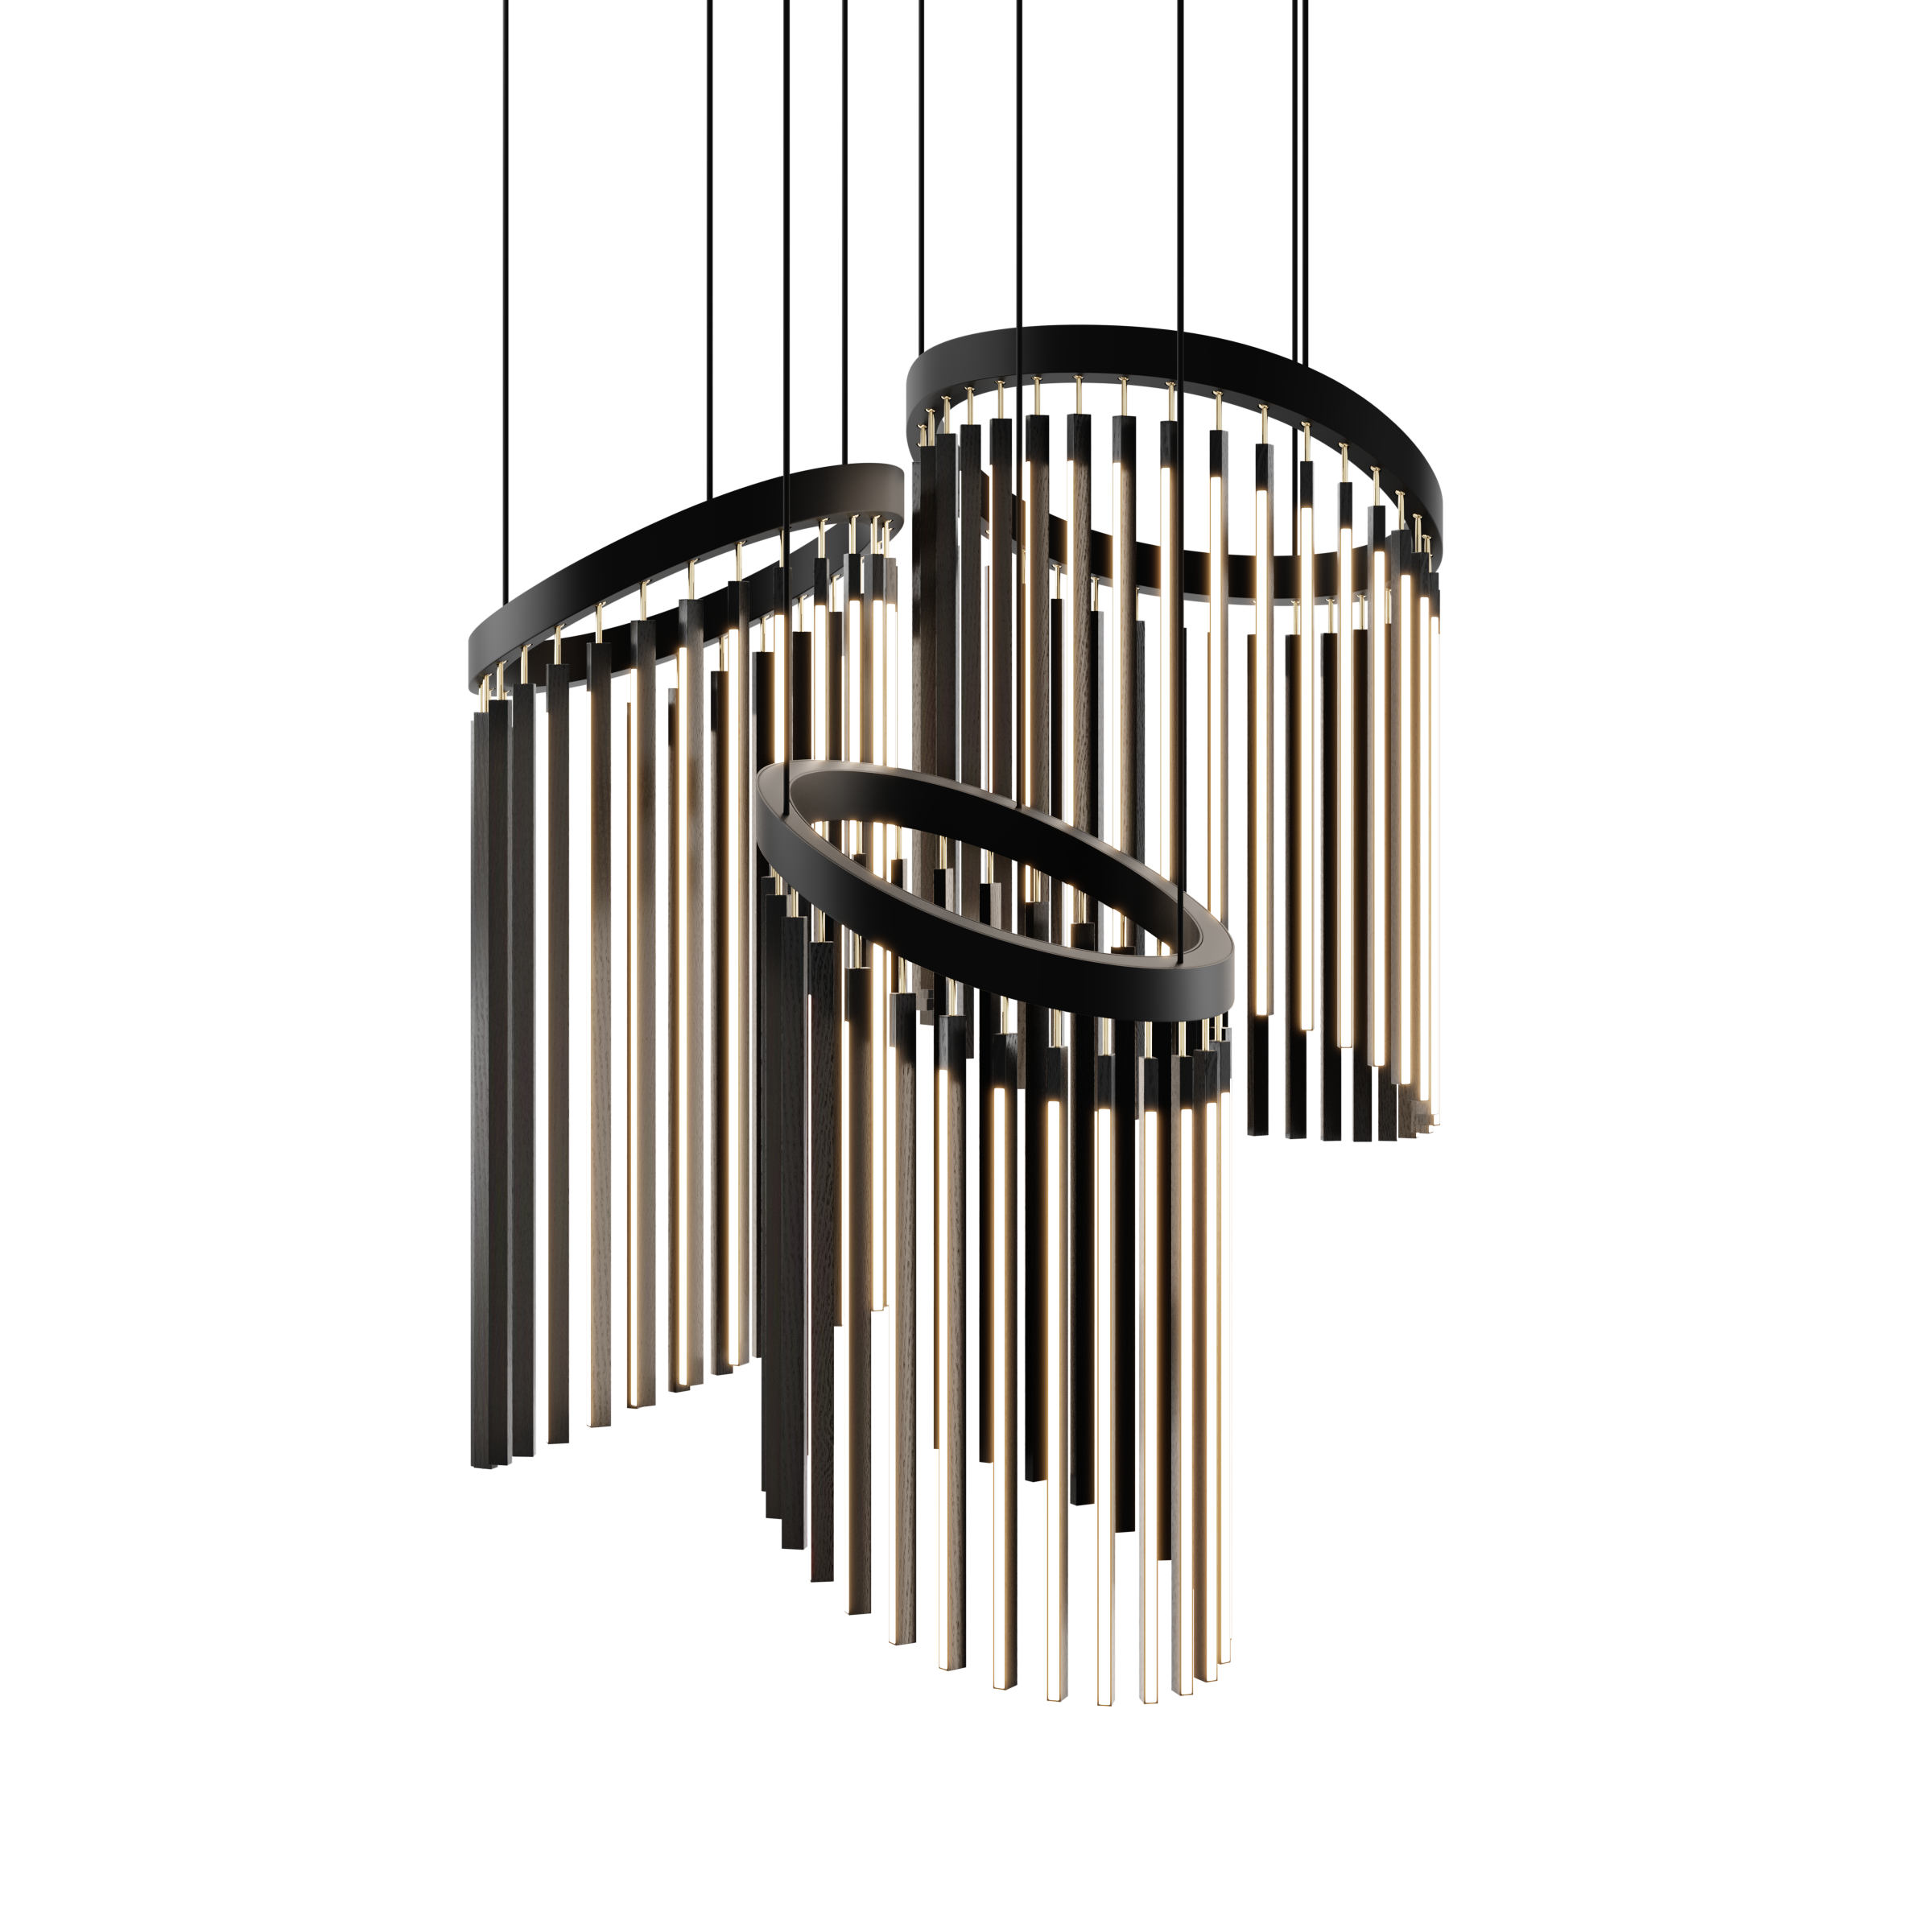 Image of a Stickbulb Multiple Chime lighting fixture. The modern fixture consists of sleek wooden beams with multiple integrated LED bulbs.